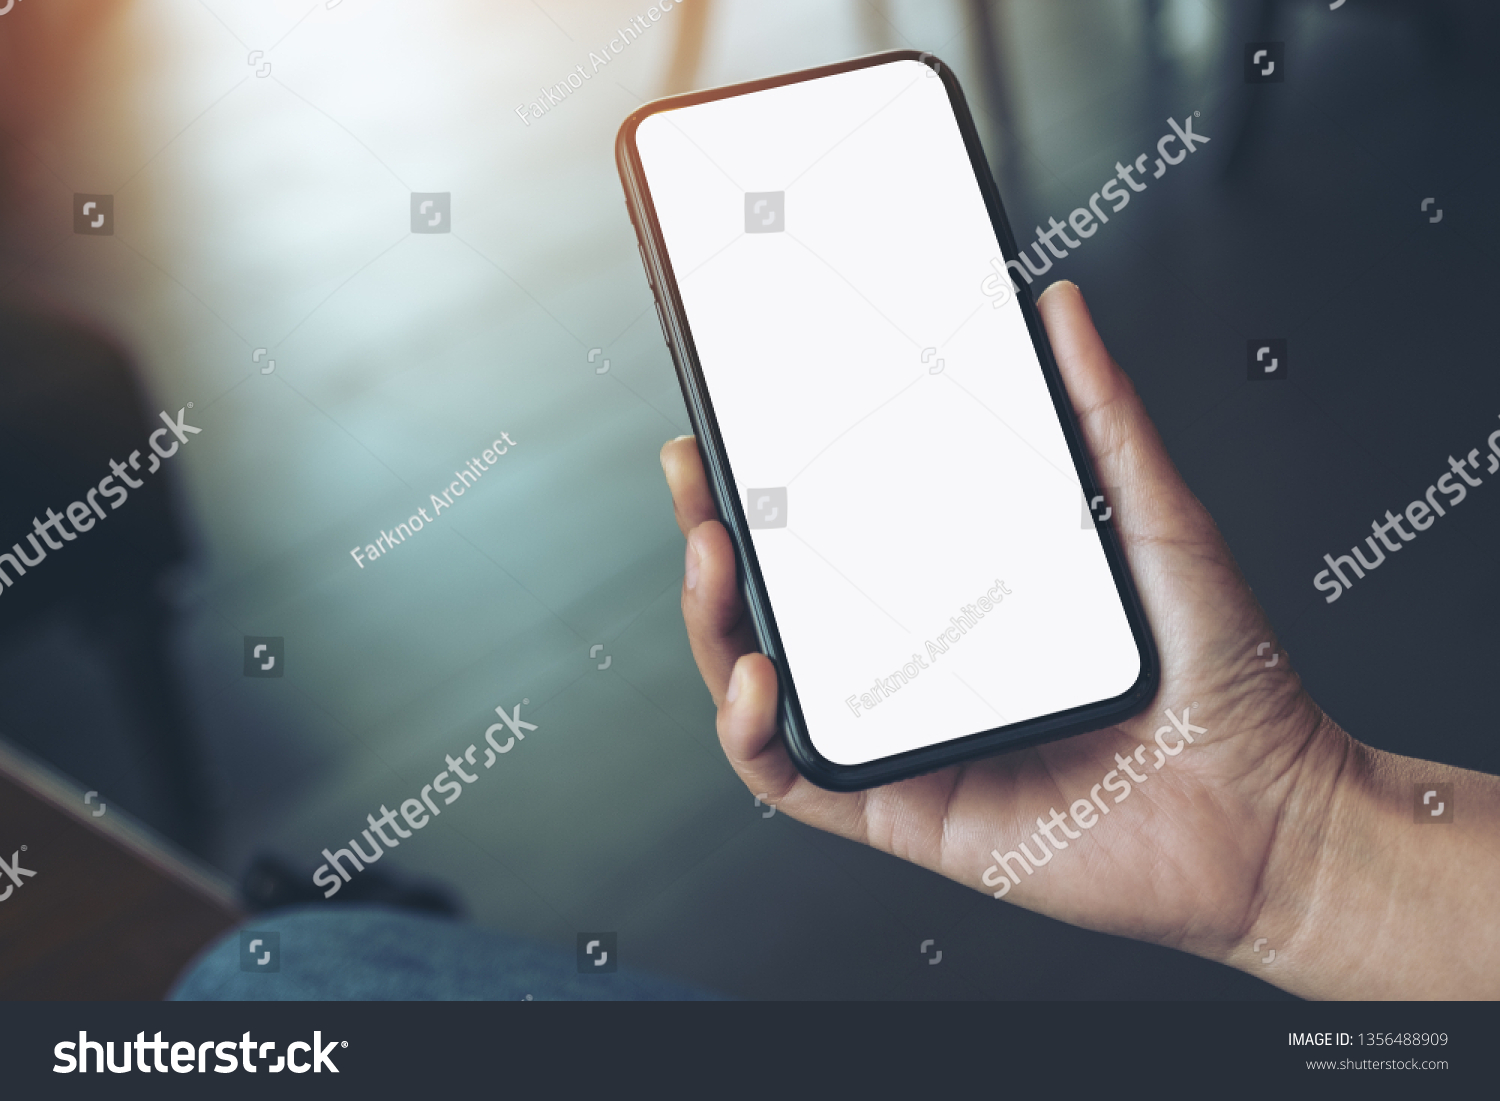 Mockup image of a woman's hand holding black mobile phone with blank desktop screen  #1356488909